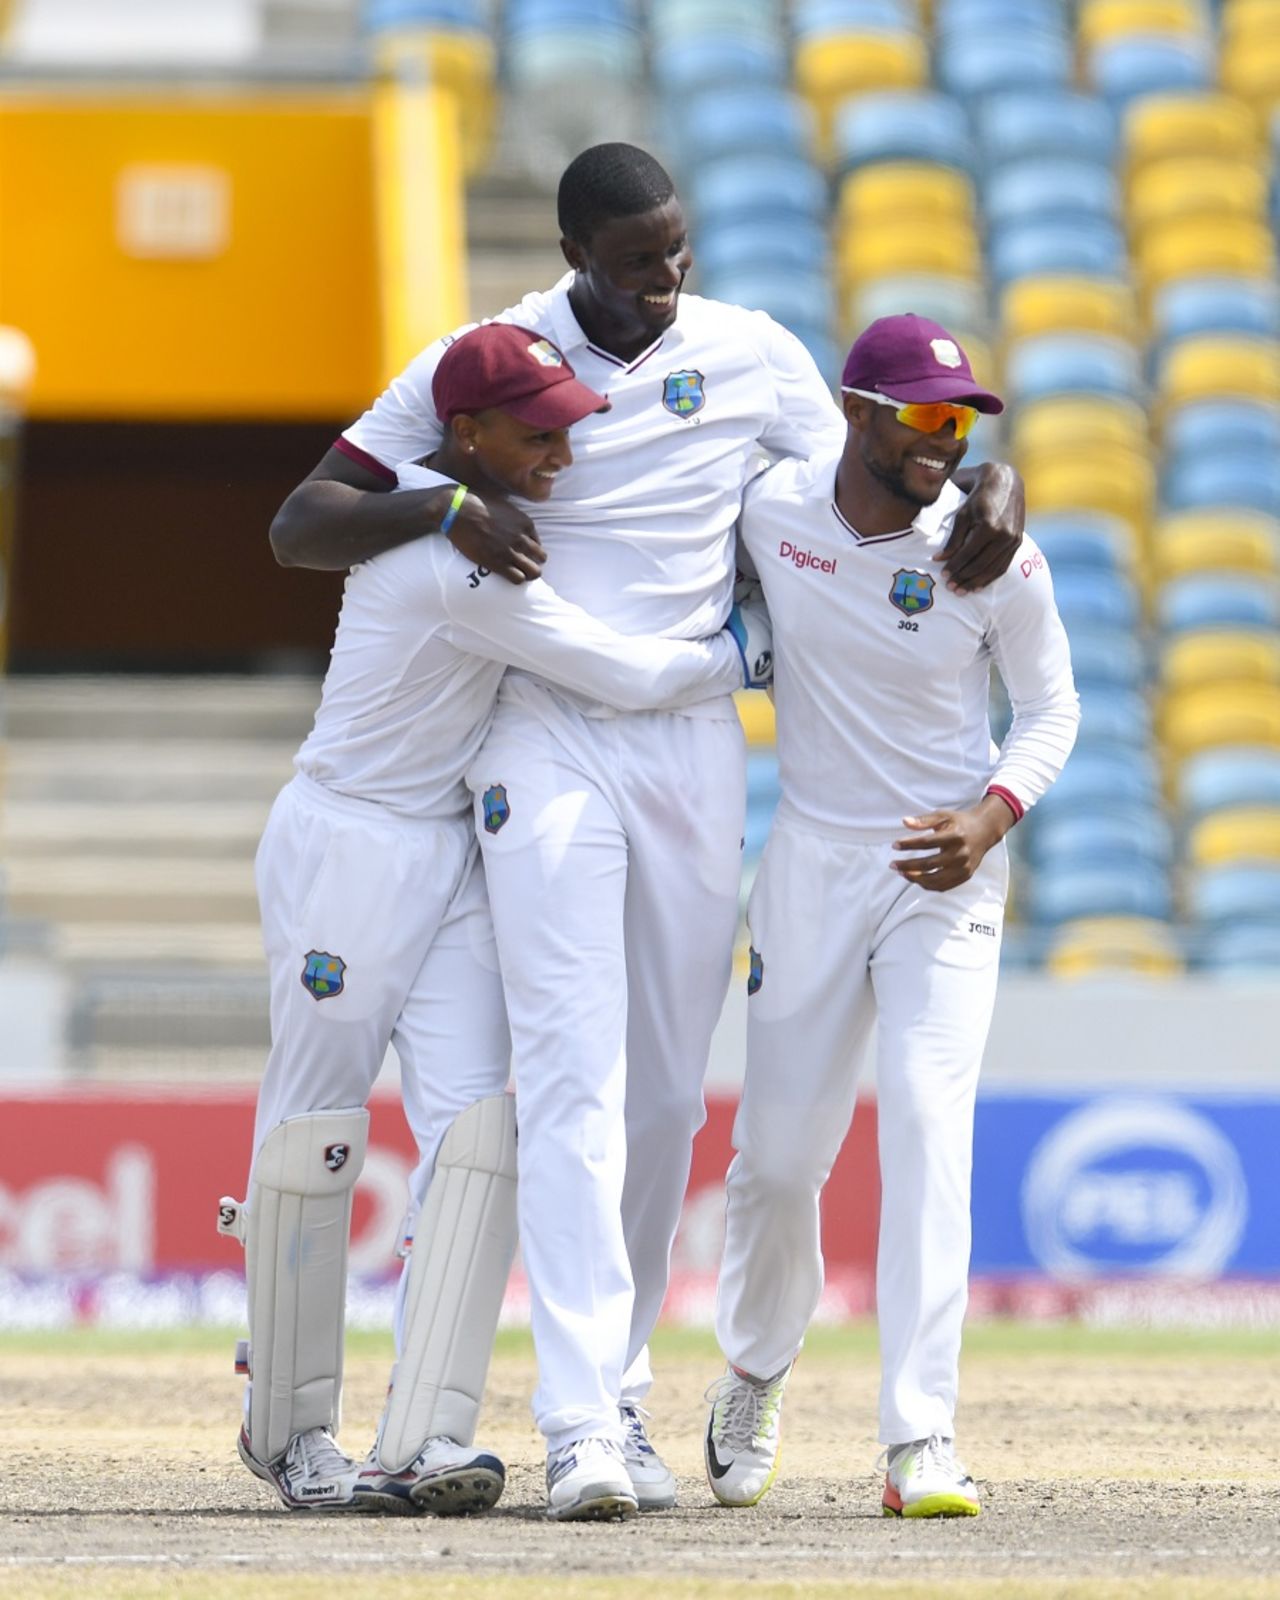 West Indies players celebrate their win, West Indies v Pakistan, 2nd Test, Bridgetown, 5th day, May 4, 2017